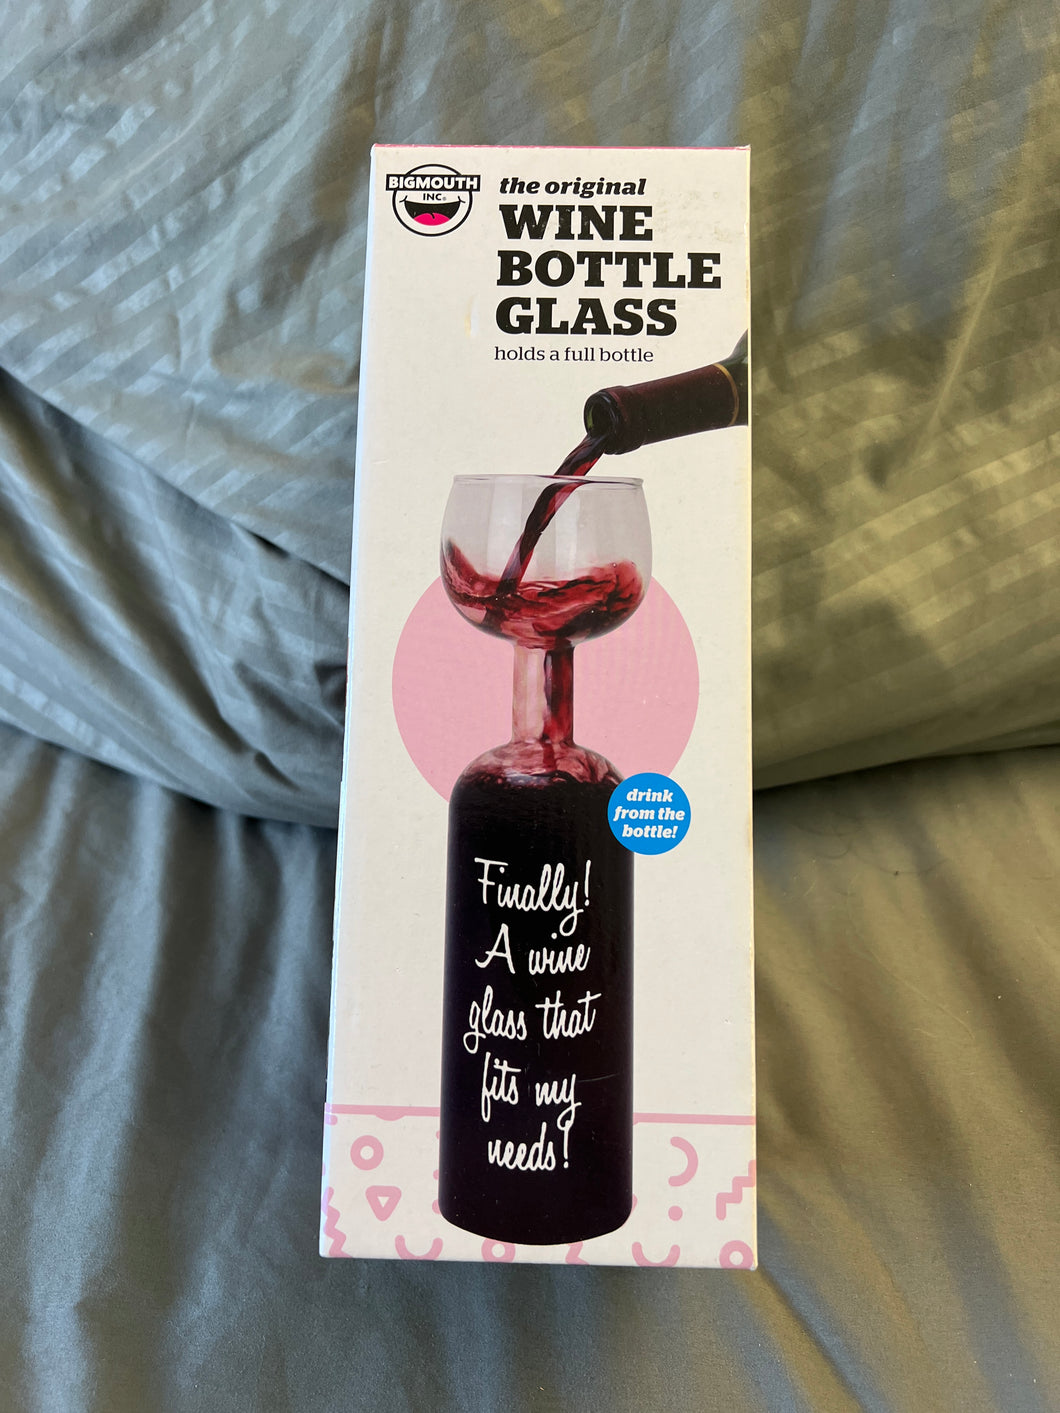 Big mouth wine bottle glass